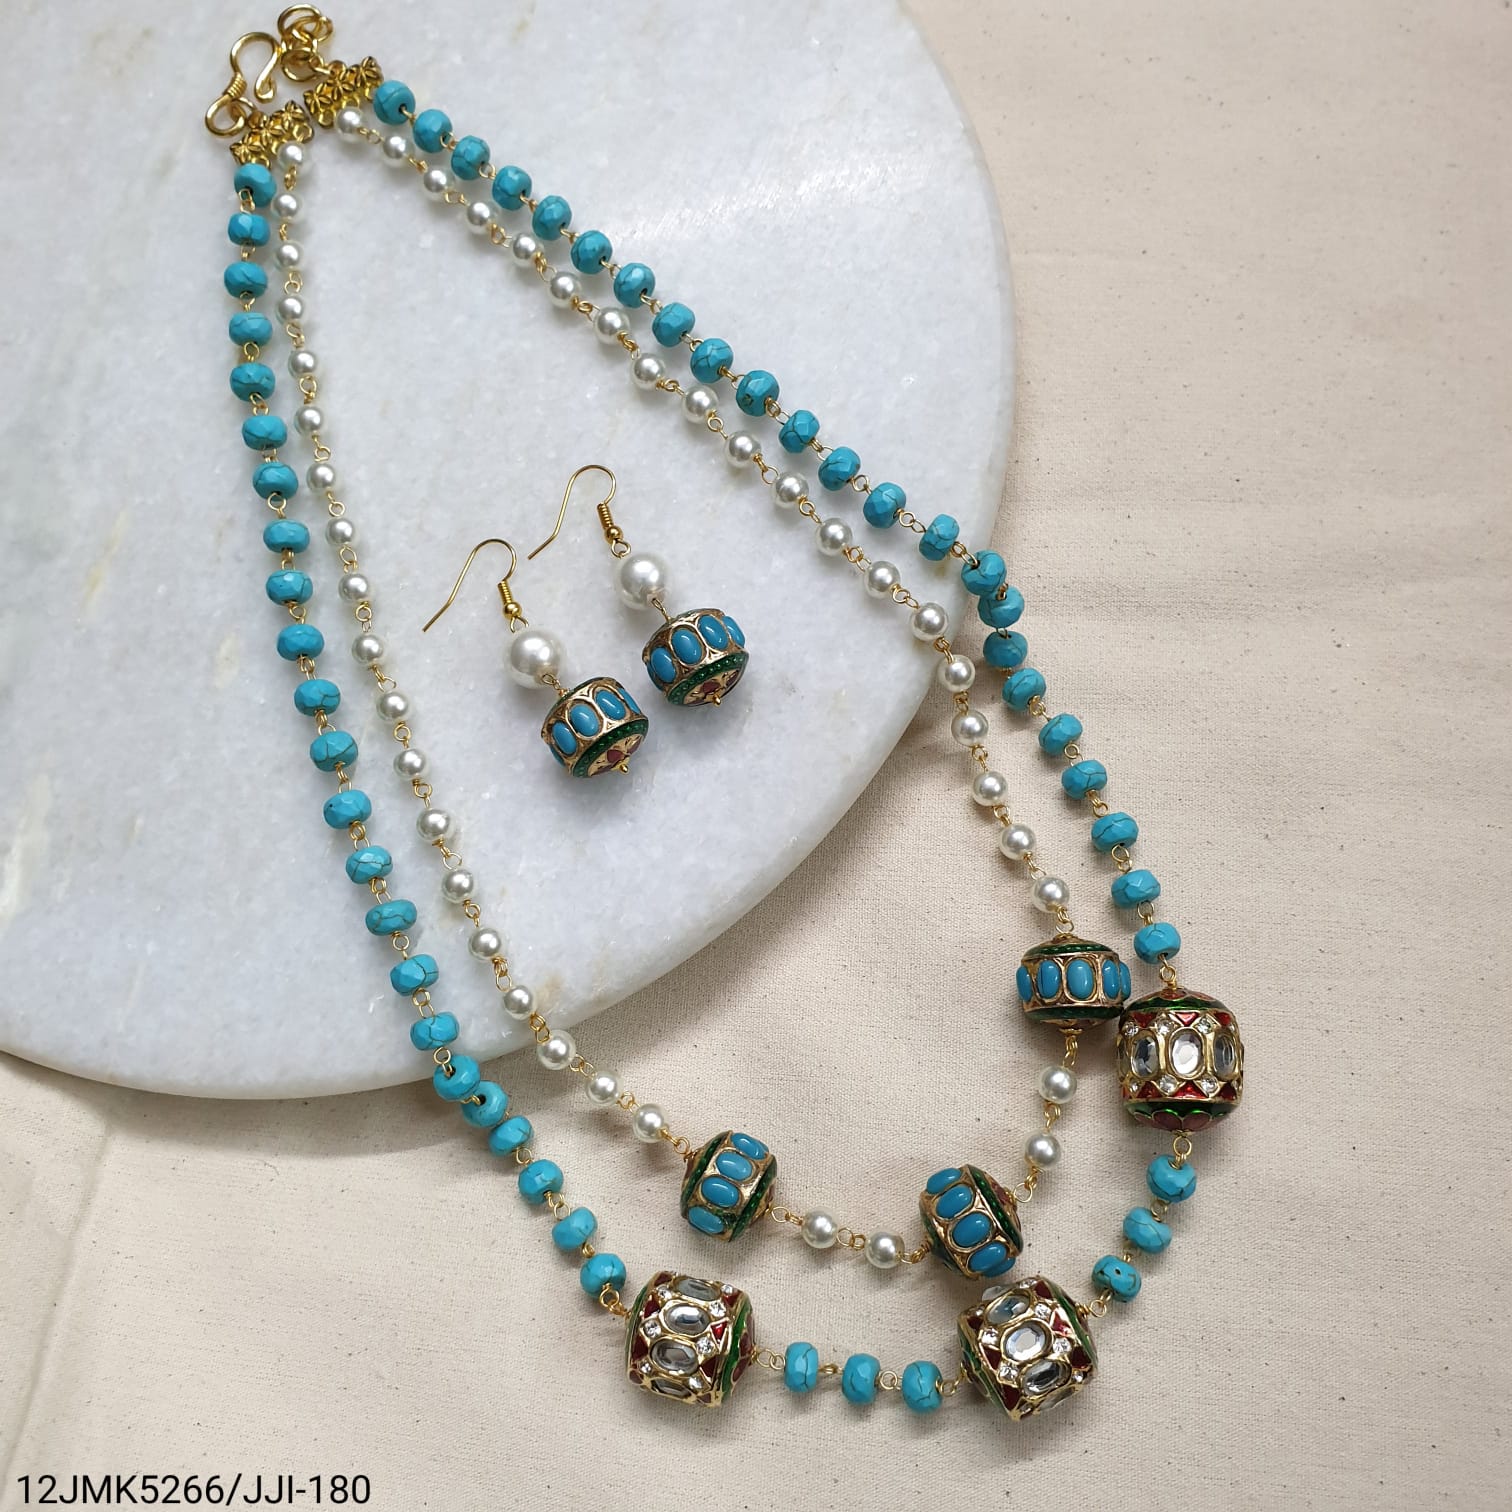 Turquoise and Pearl Beaded Jadau Necklace With Earrings